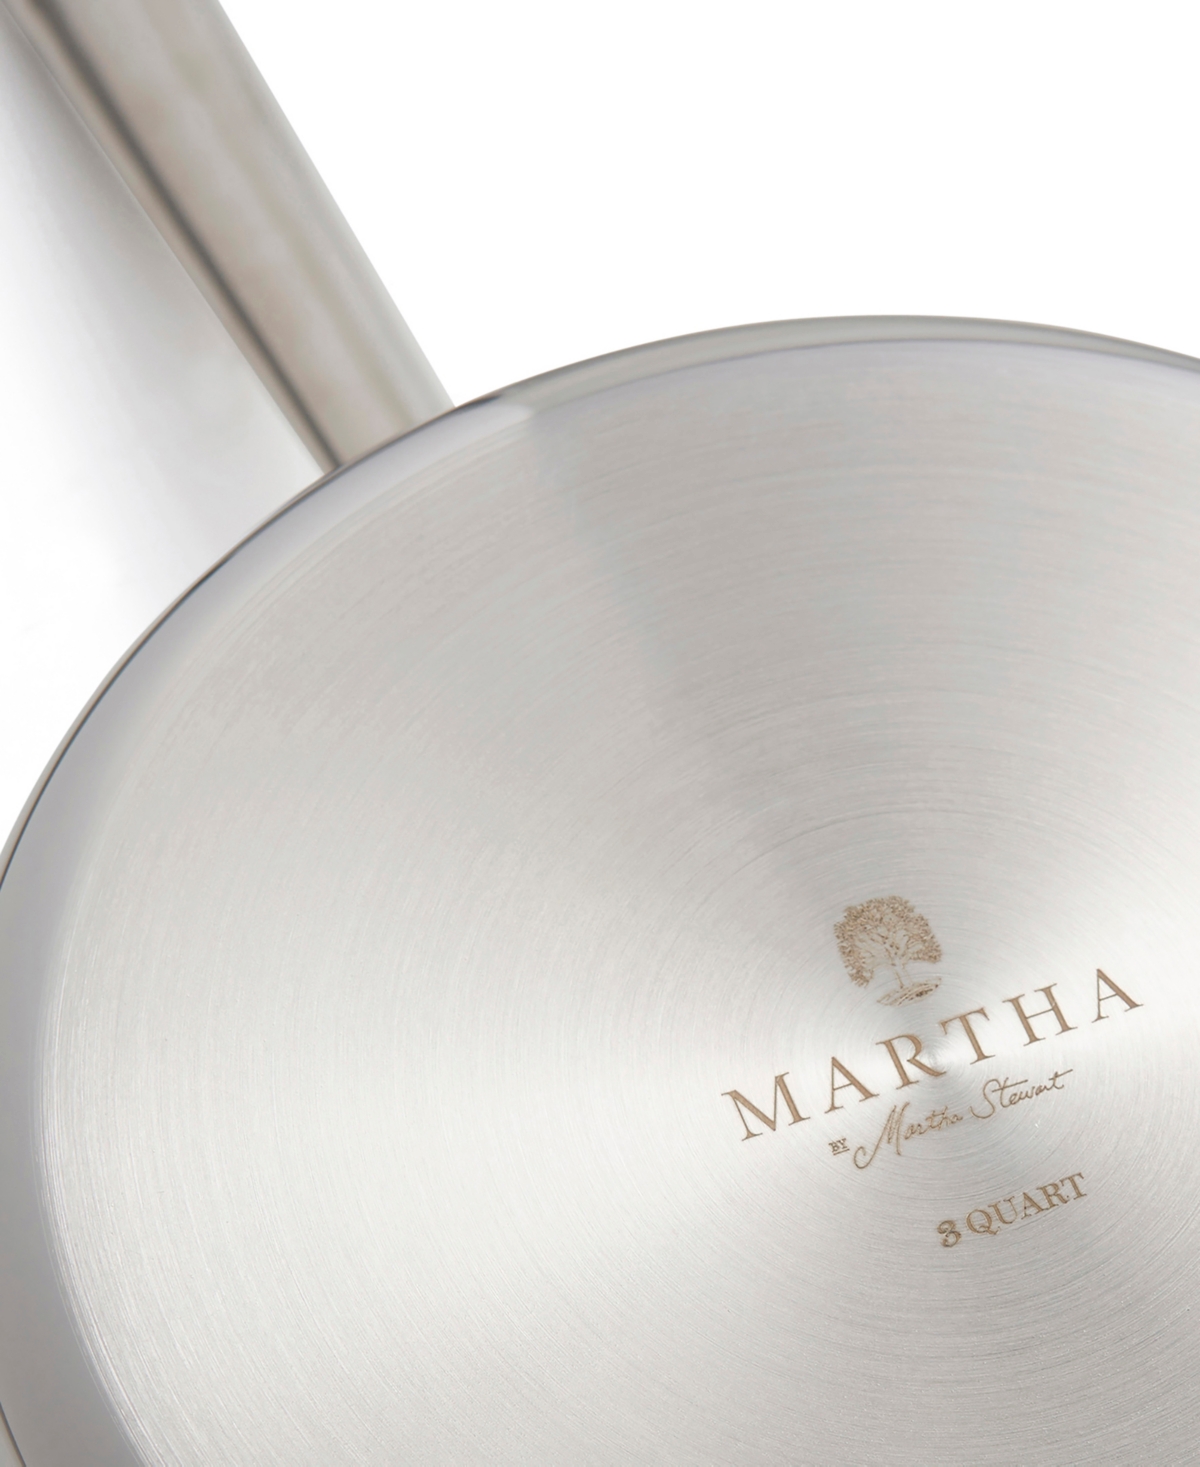 Shop Martha Stewart Collection Martha By Martha Stewart Stainless Steel 3 Qt Low Saucepan With Lid In Silver